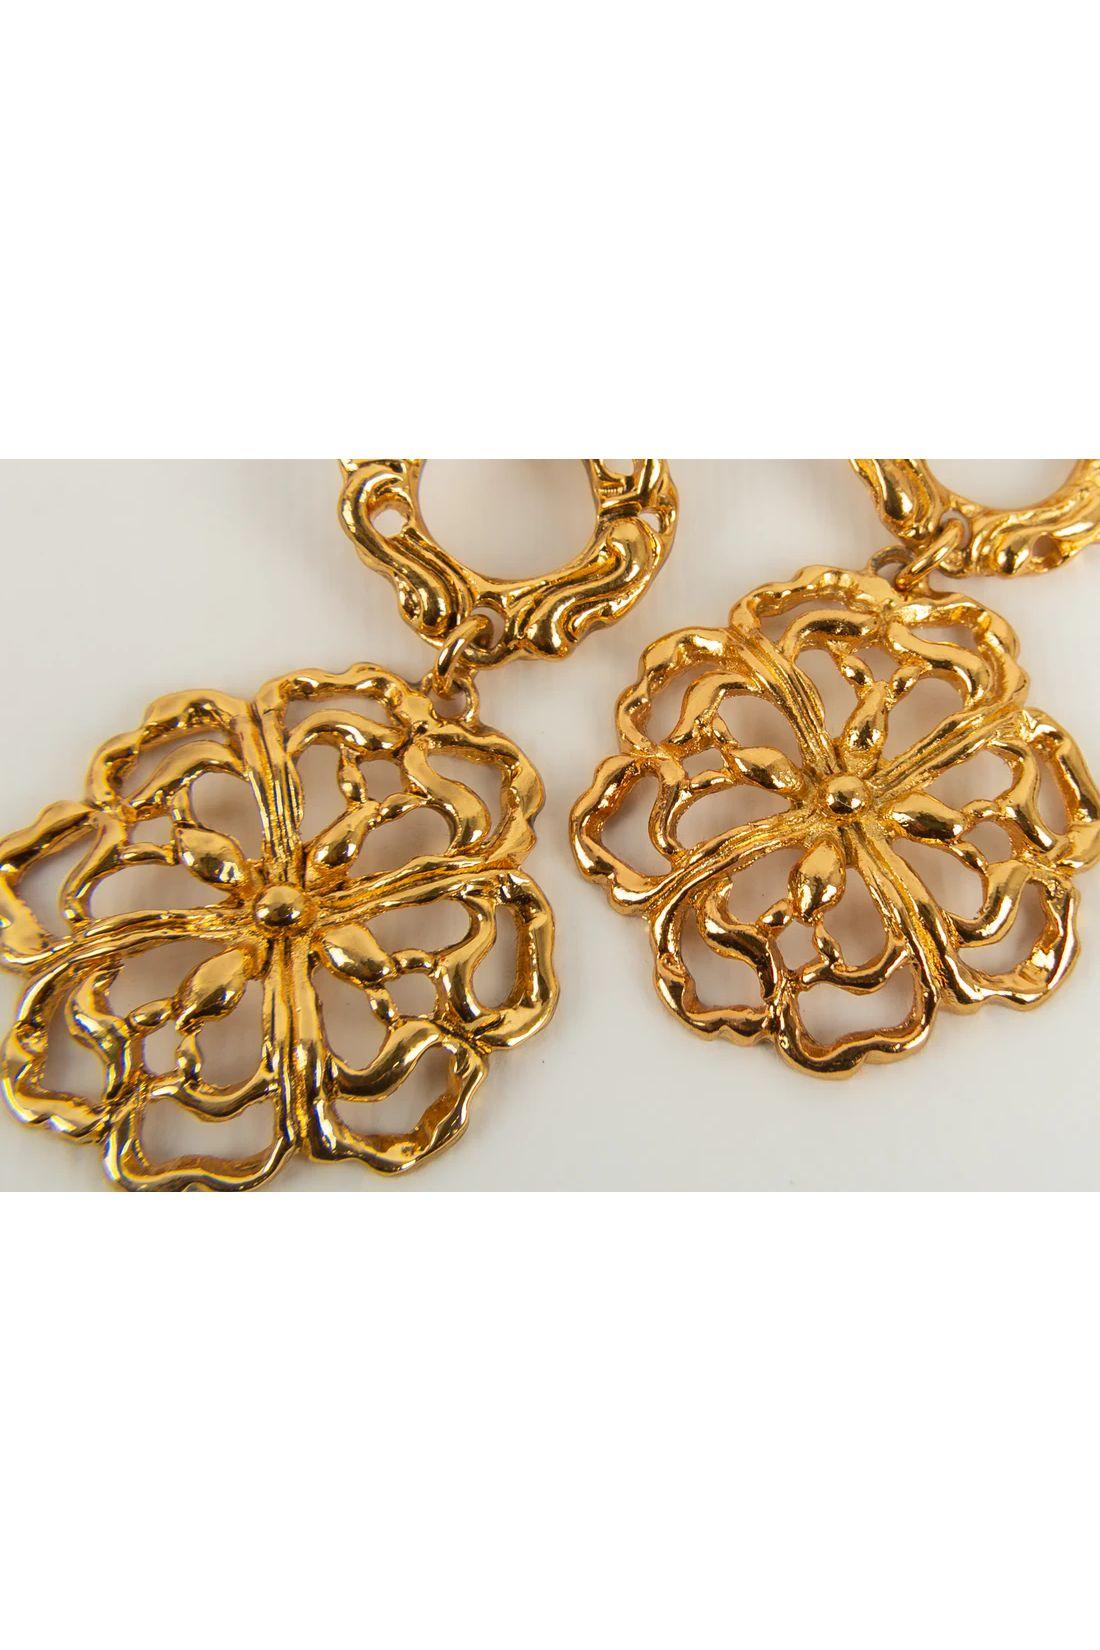 Christian Lacroix Gold Metal Clip Earrings For Sale 2